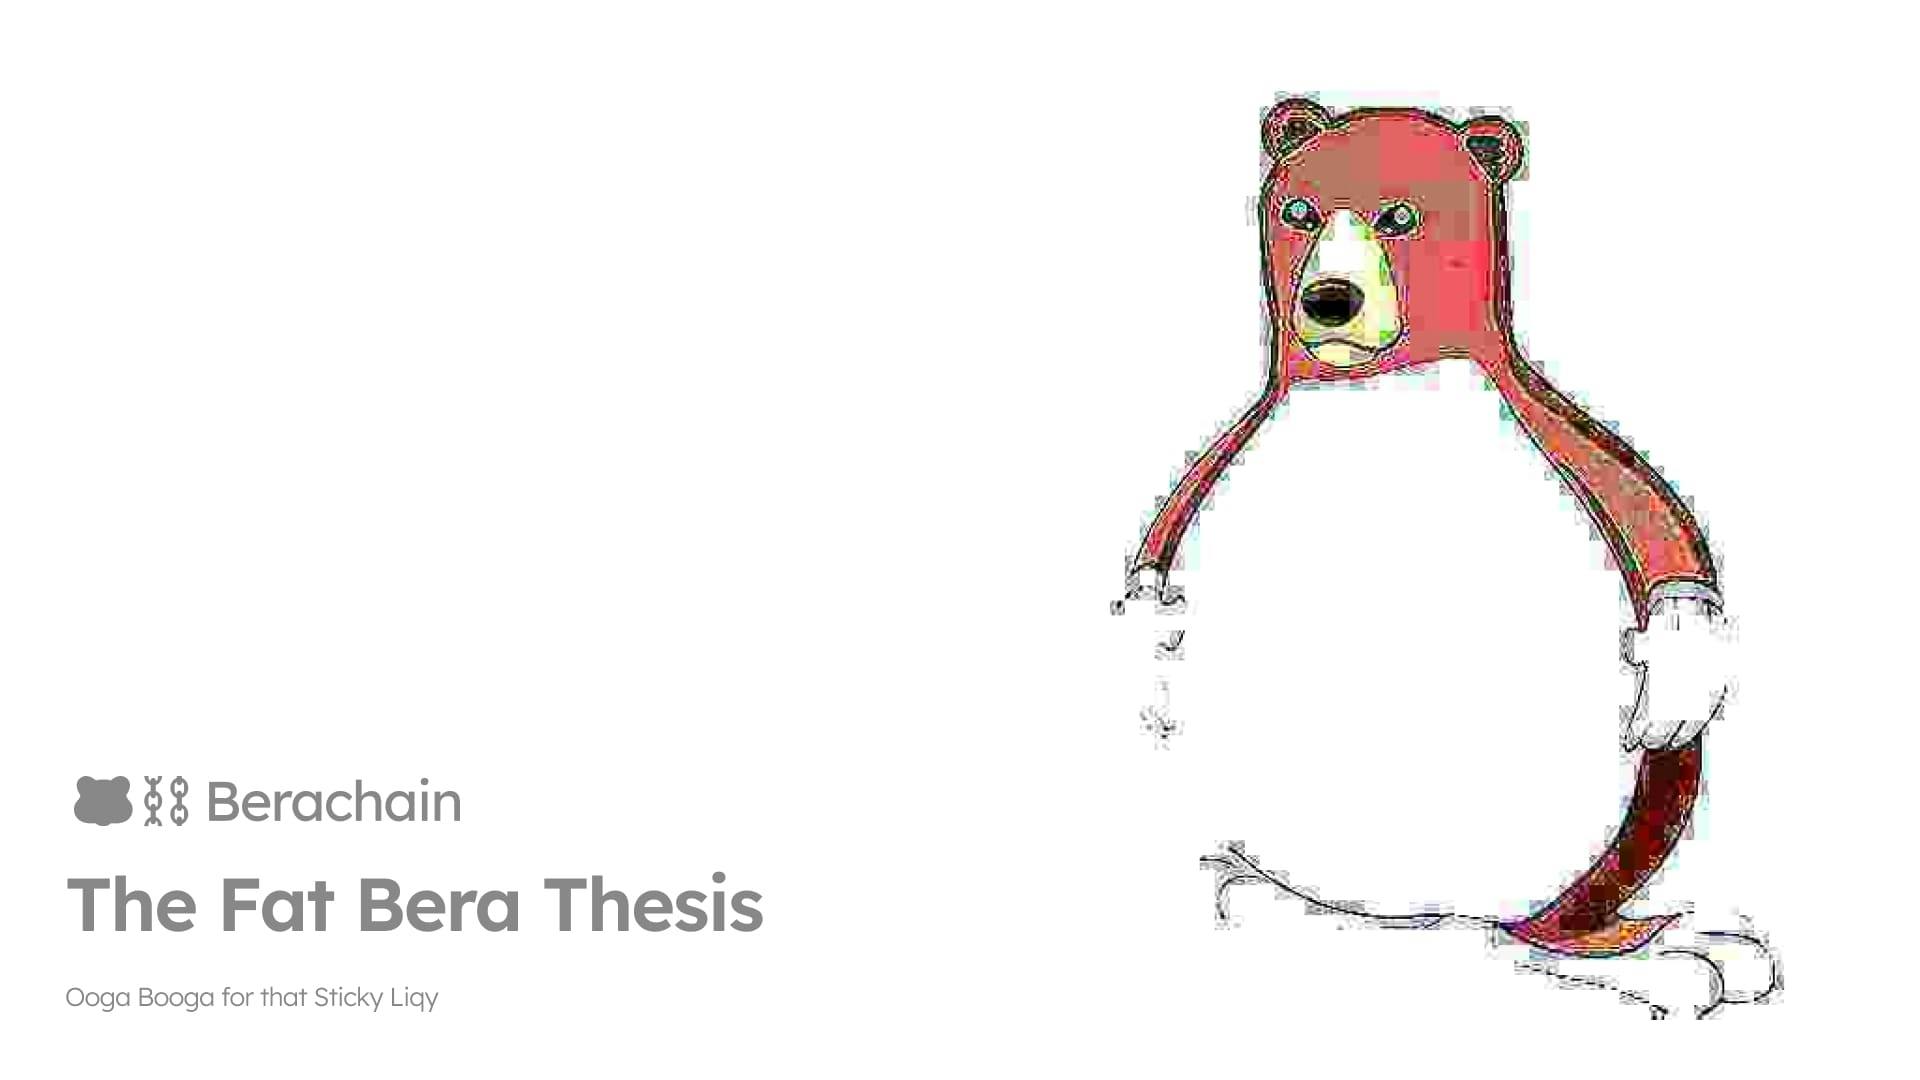 The Fat Bera Thesis